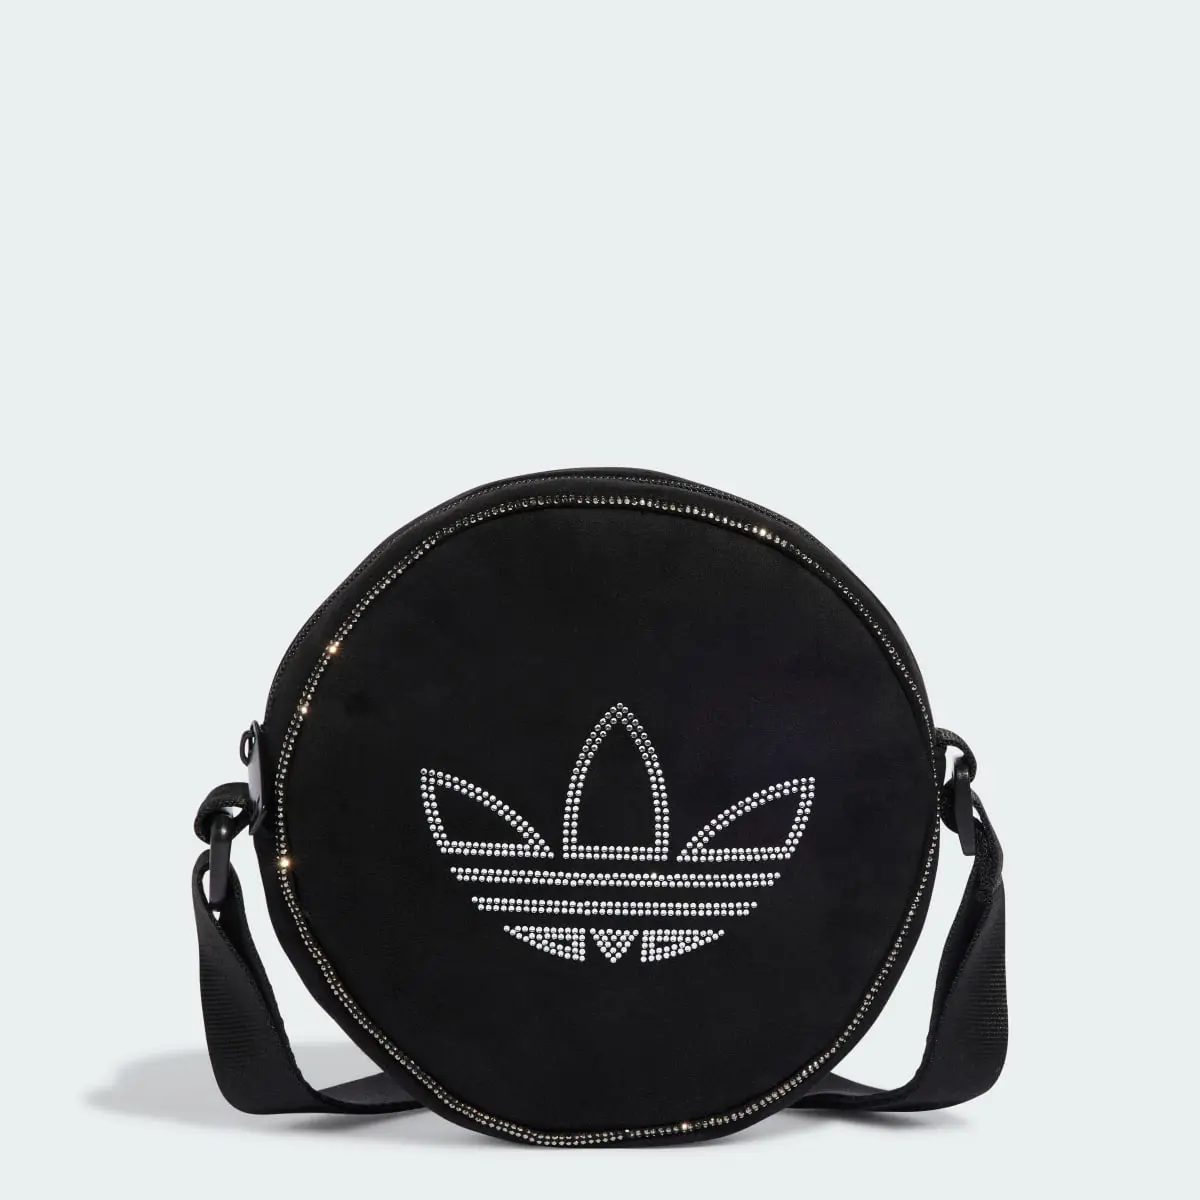 Adidas Sac rond matière synthétique strass. 1